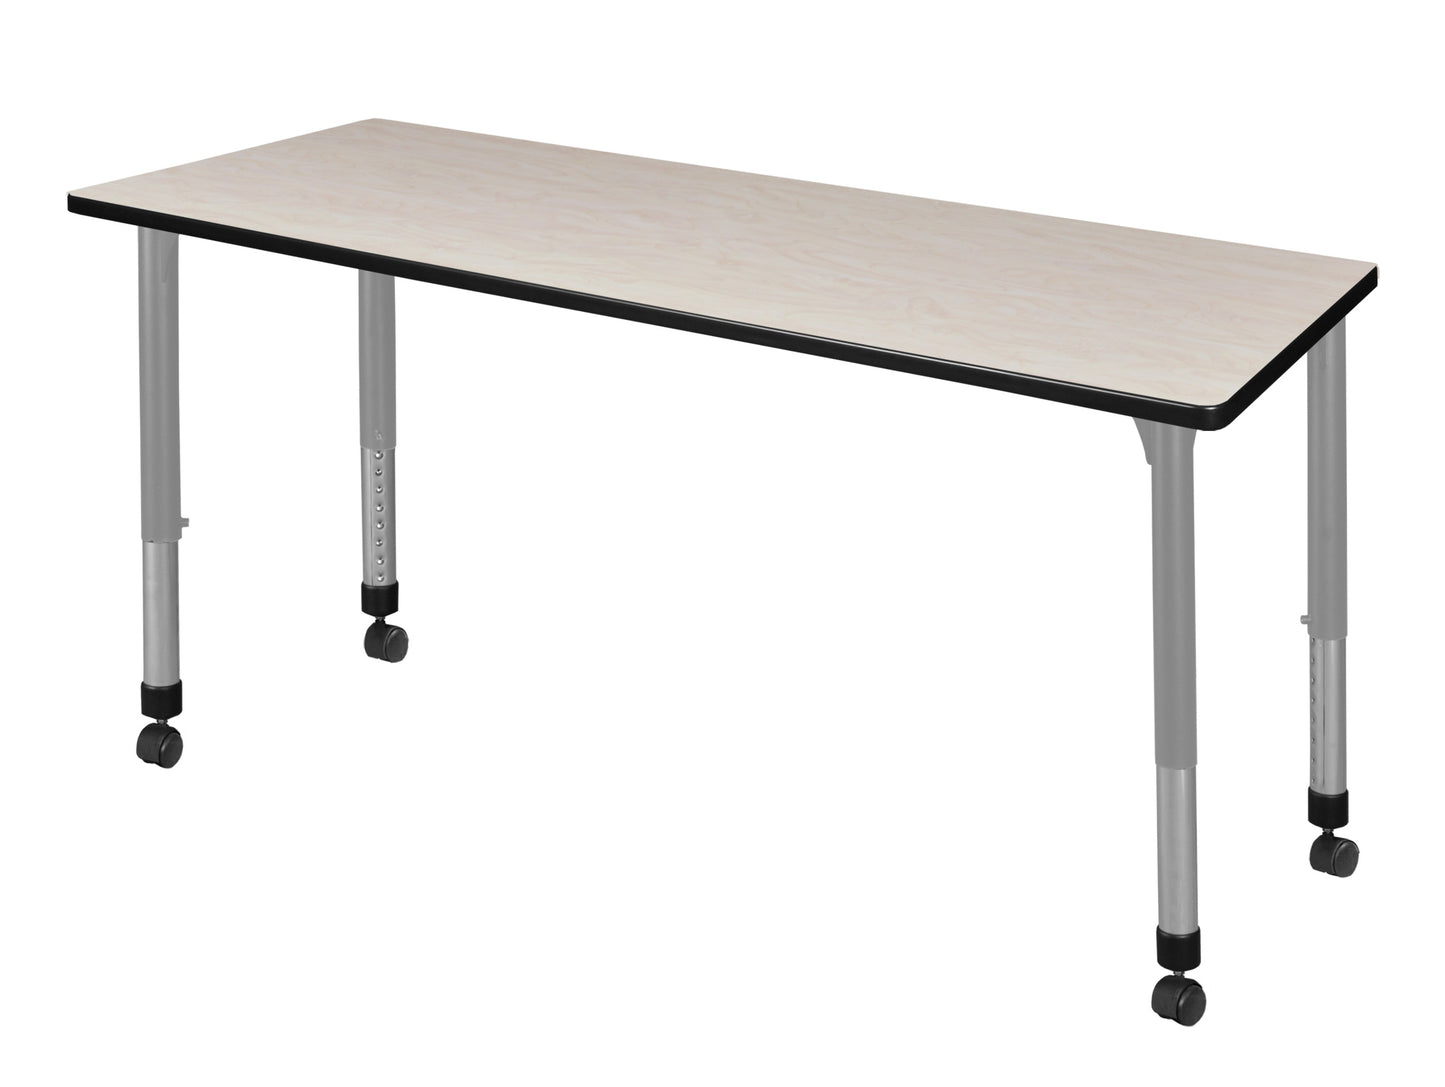 Regency Kee 72 x 30 in. Height Adjustable Mobile Classroom Activity Table